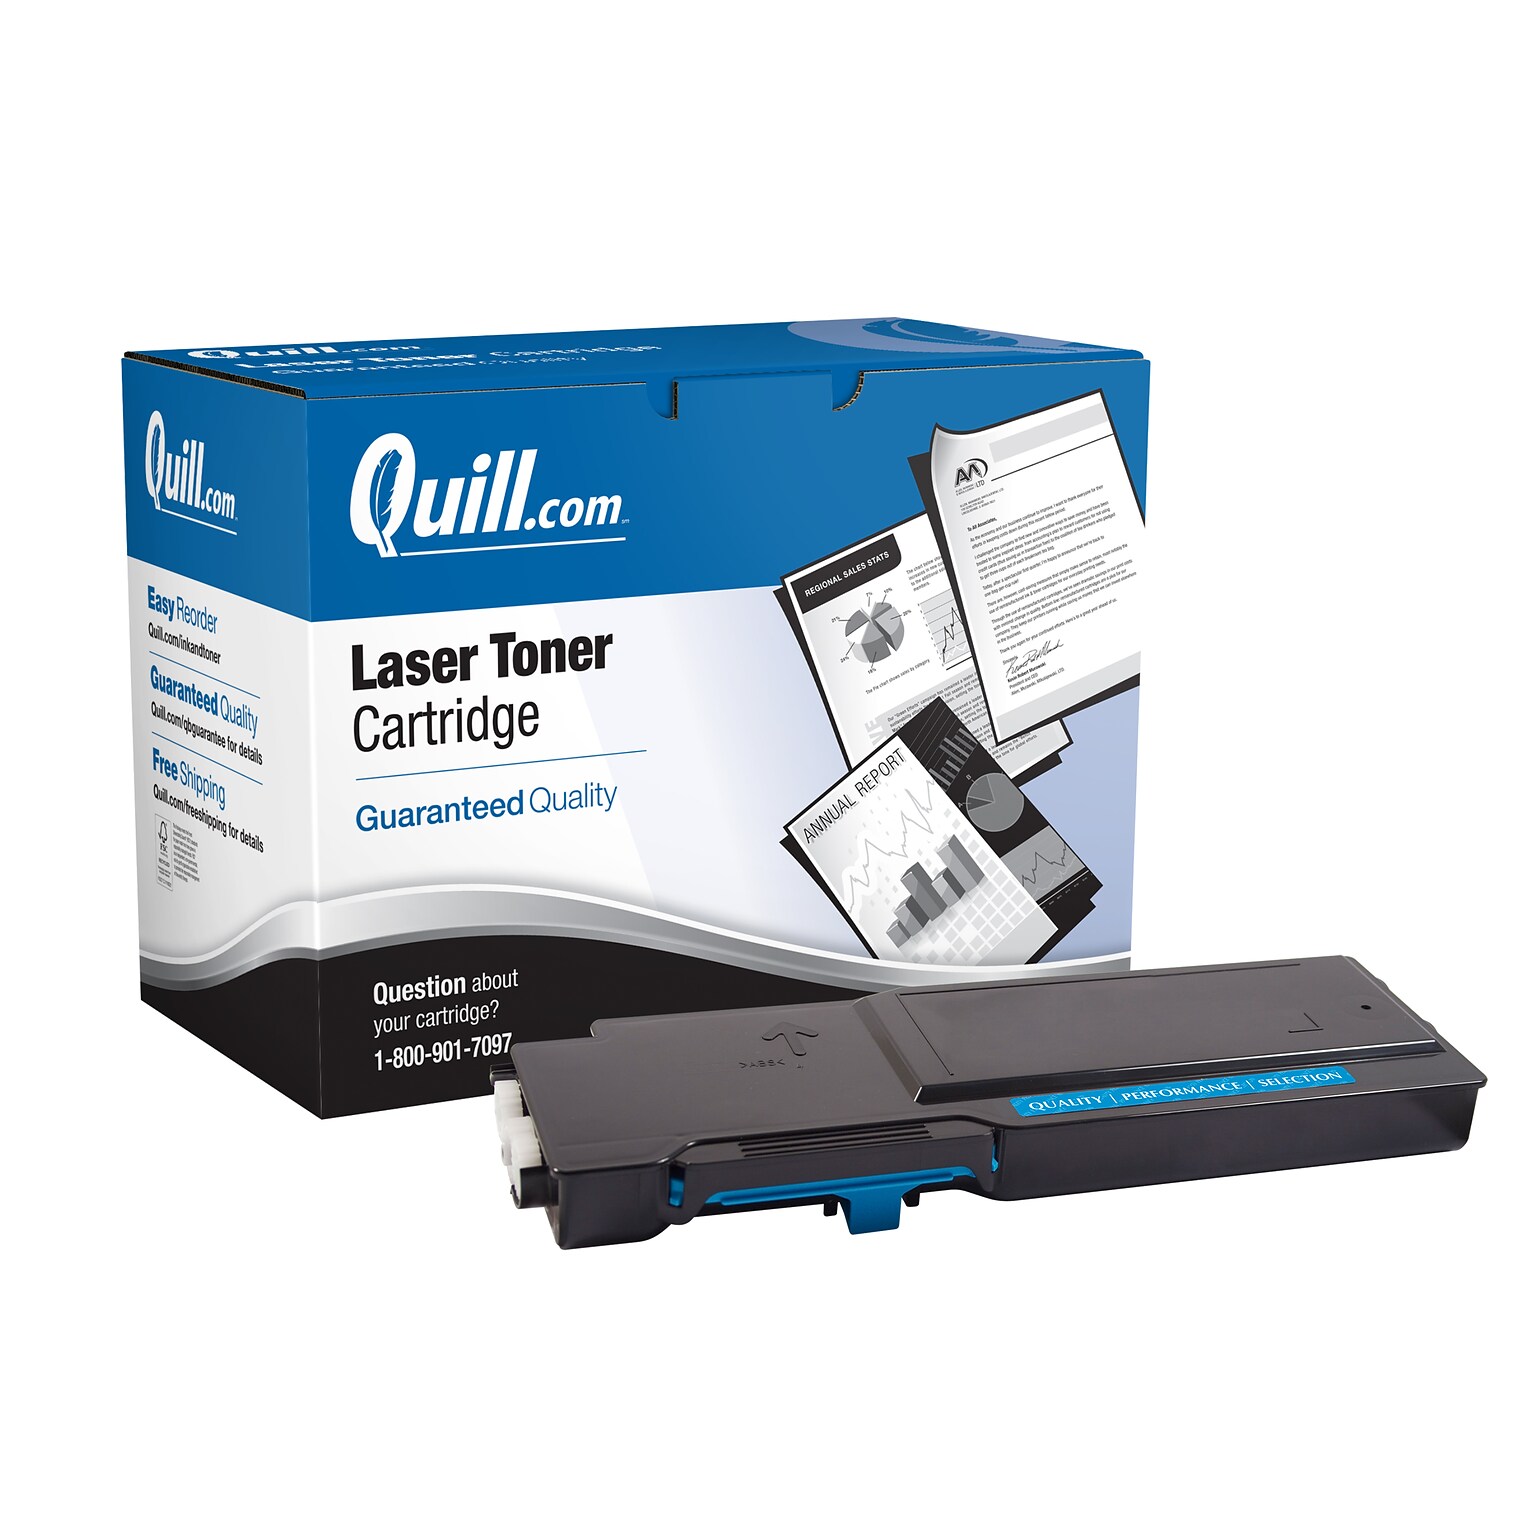 Quill Brand® Remanufactured Cyan High Yield Toner Cartridge Replacement for Xerox 6600/6605 (106R02225) (Lifetime Warranty)